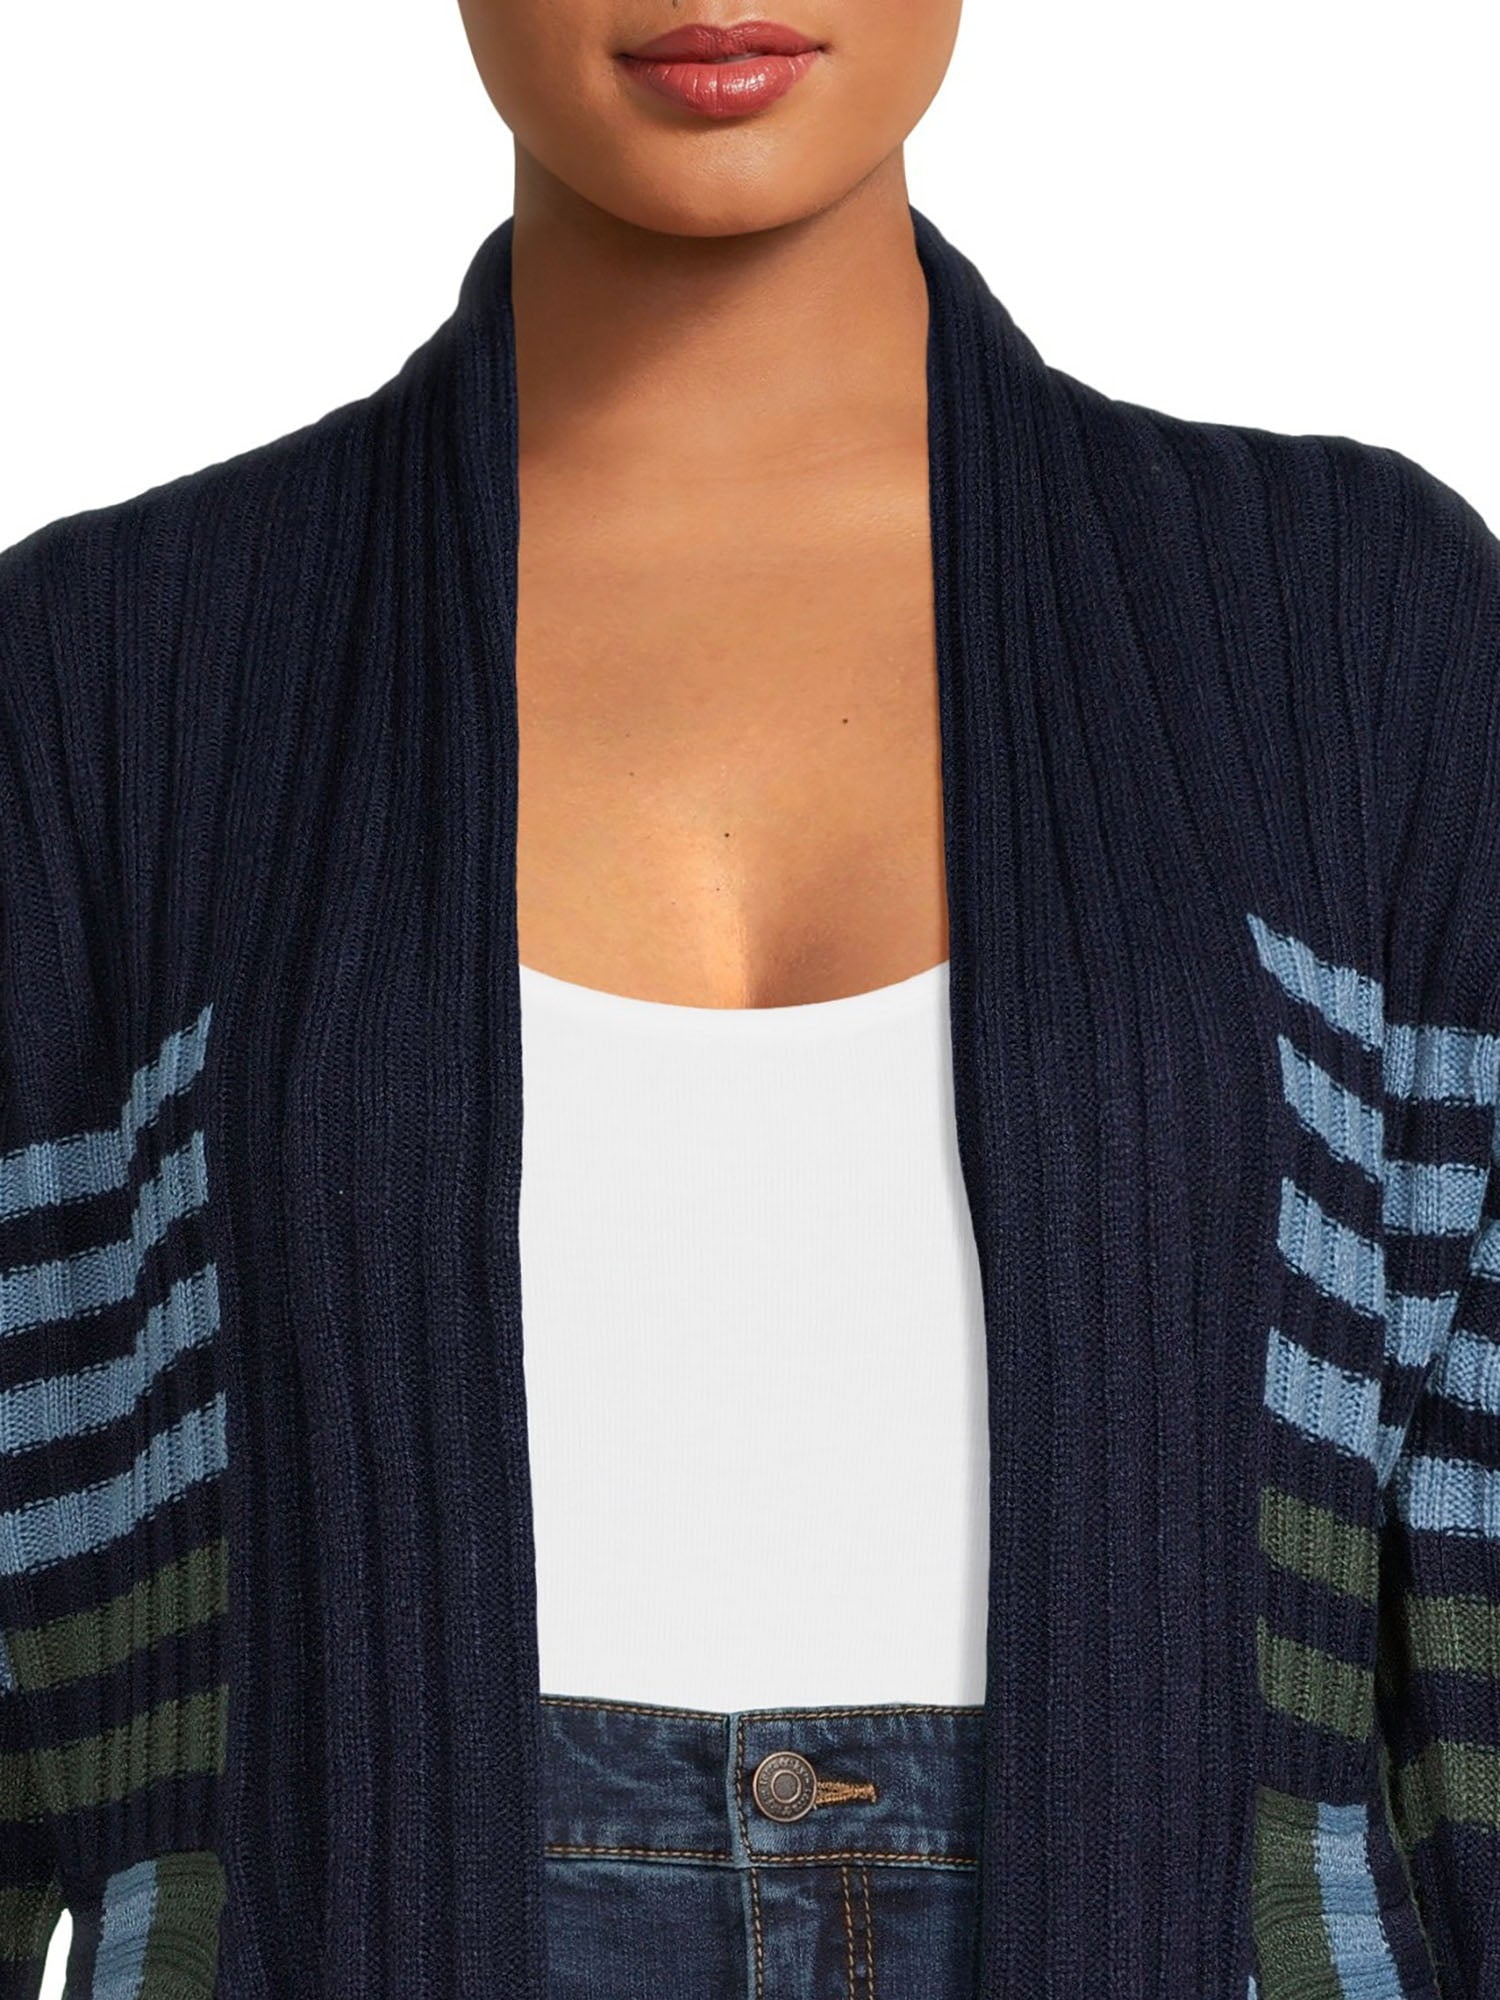 What's Next Women's and Women's Plus Size Ribbed Flyaway Cardigan - image 3 of 7